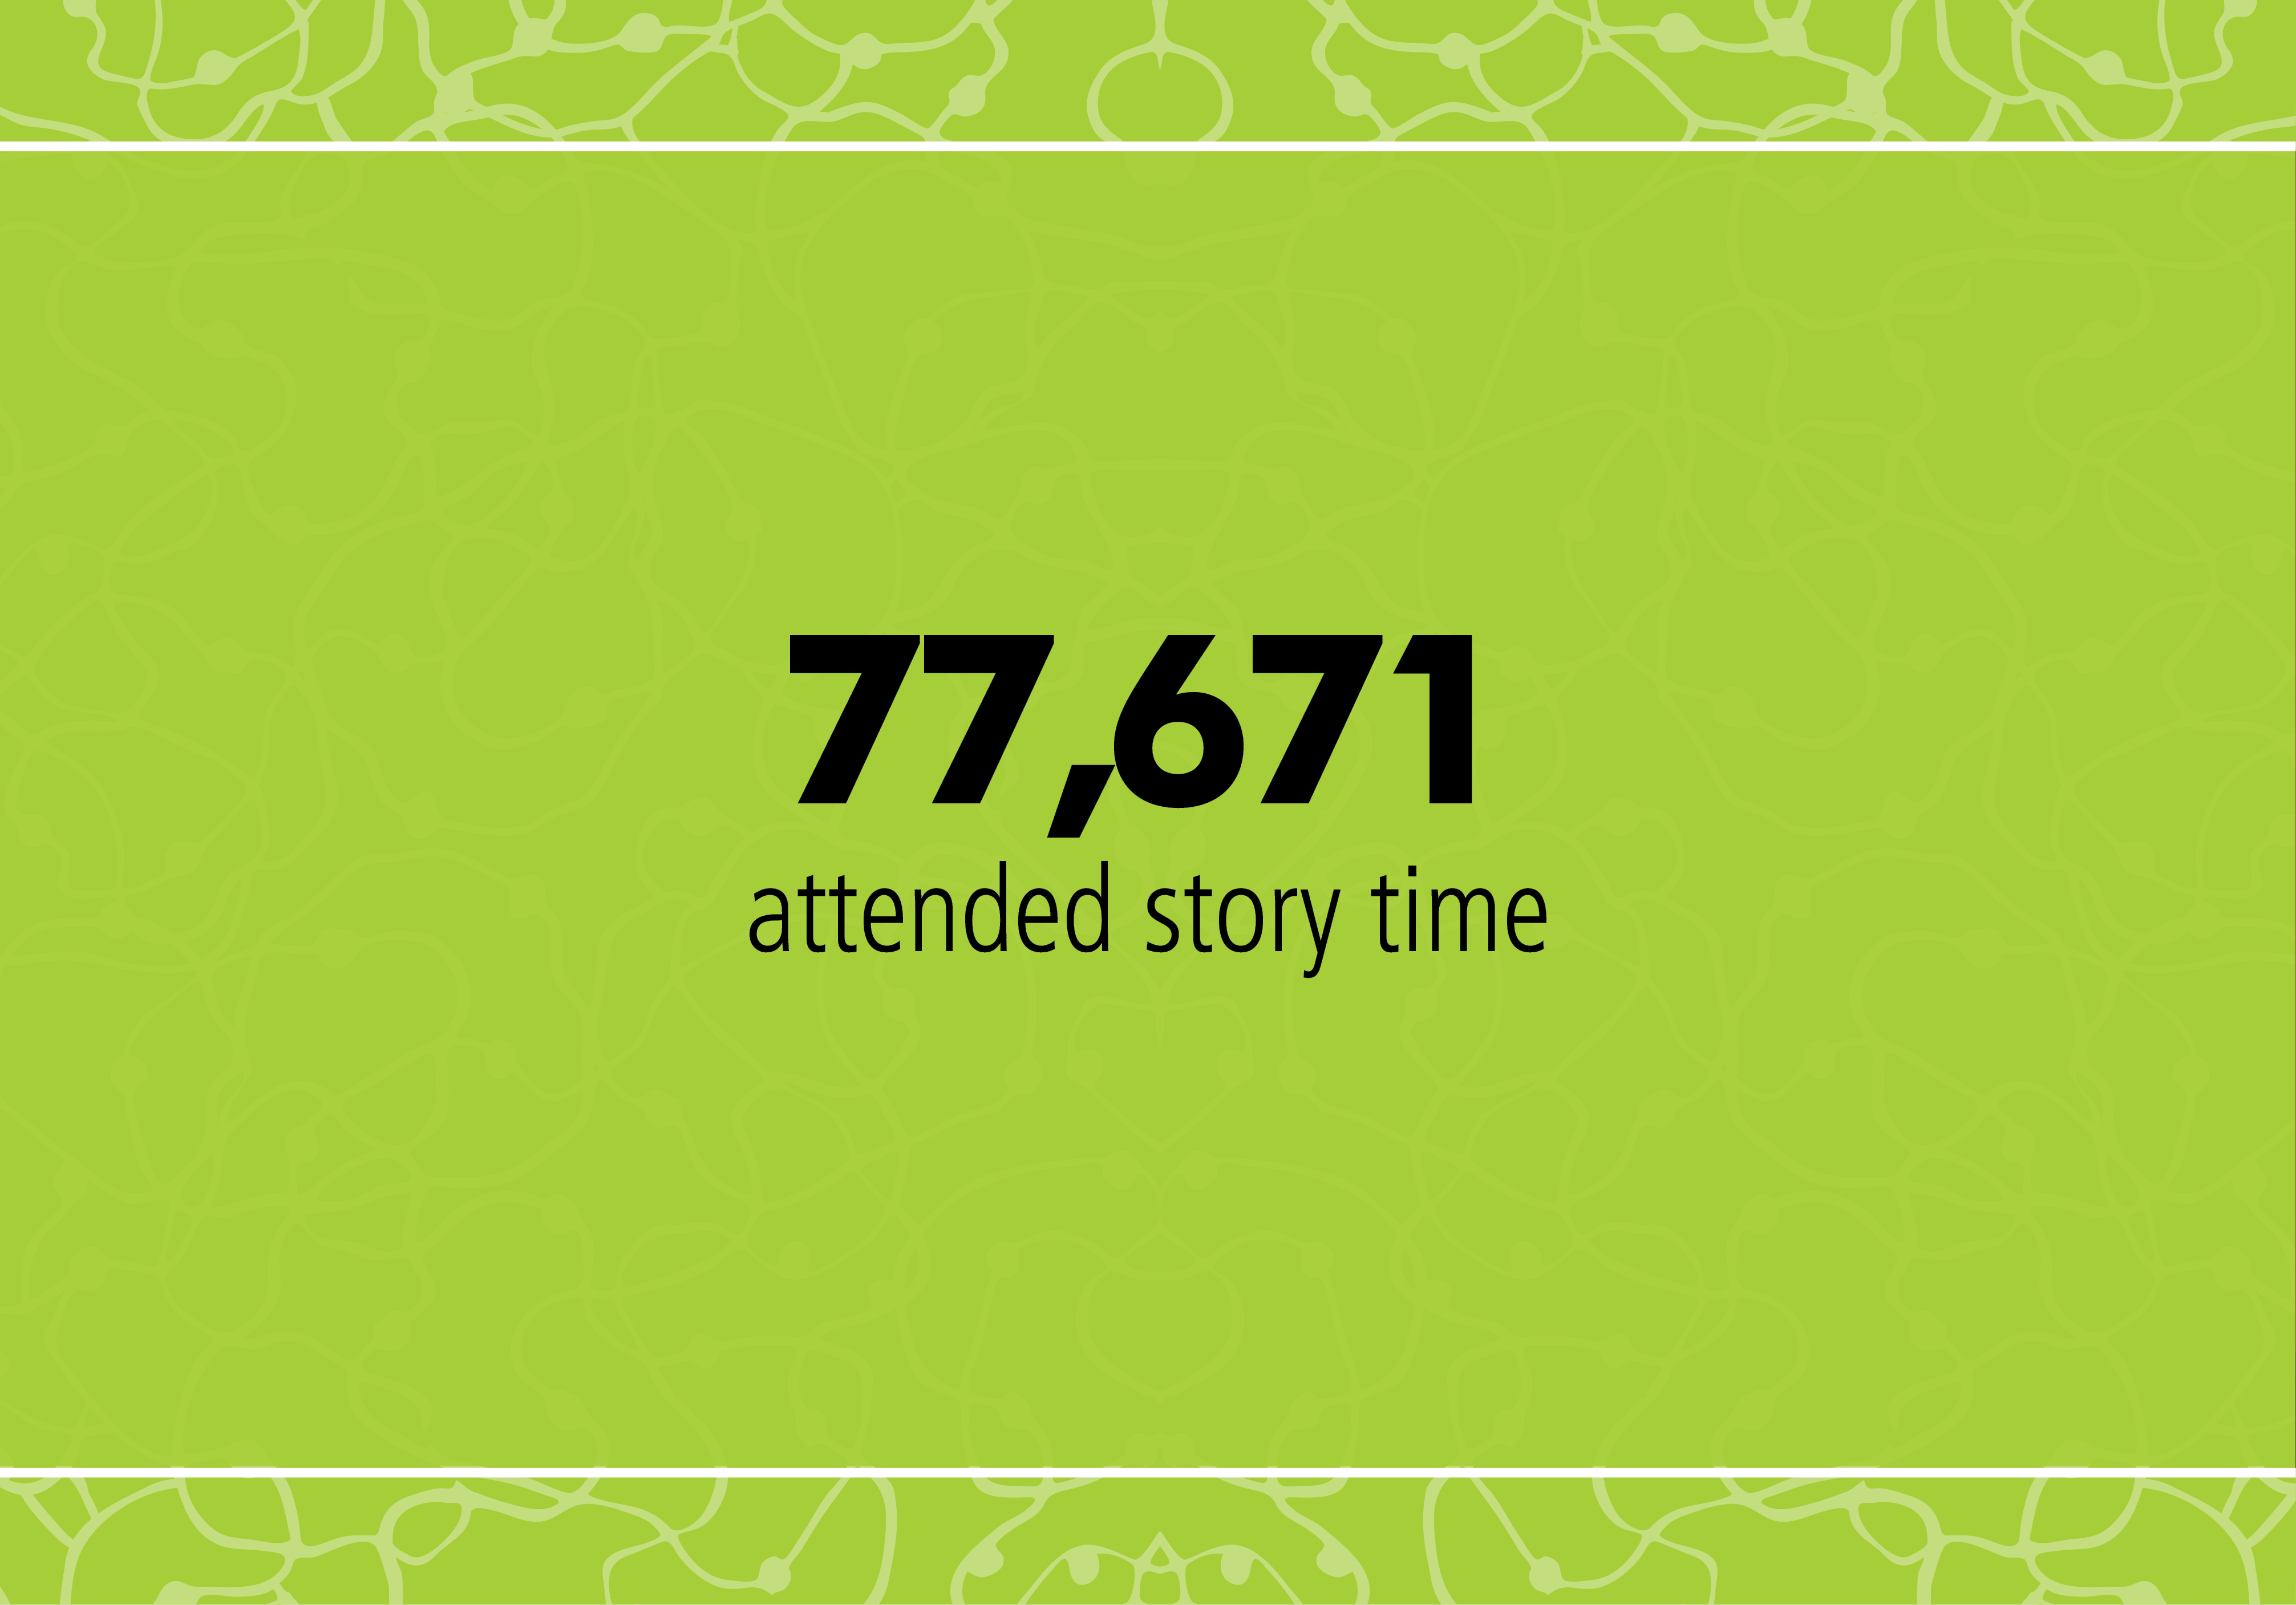 77,671 attended story time